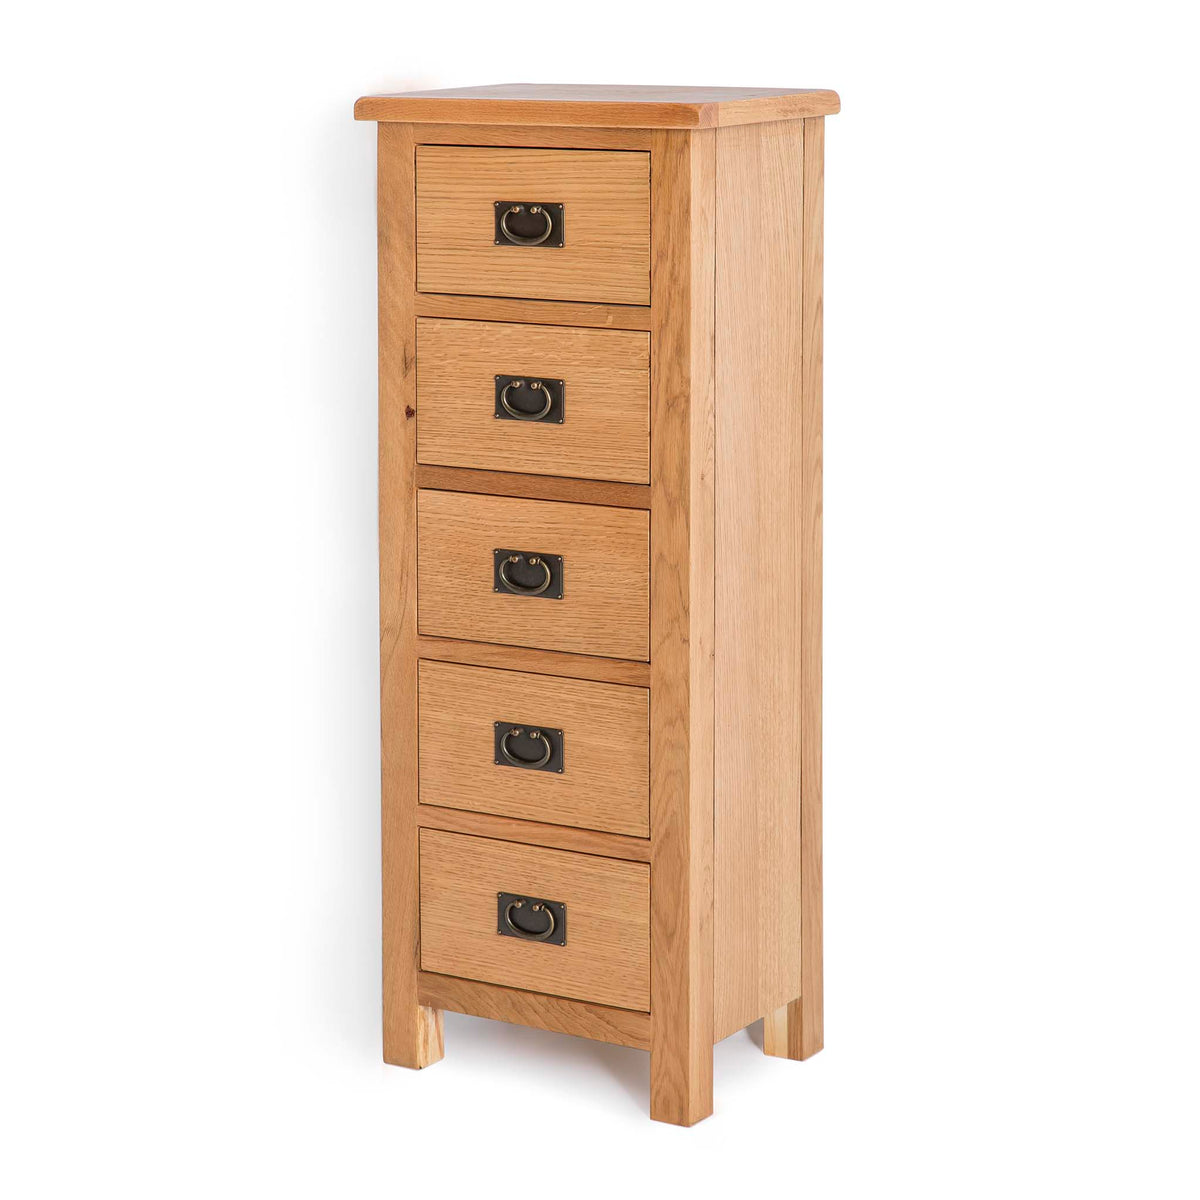 Surrey Oak 5 drawer tallboy chest of 5 drawers - Side view